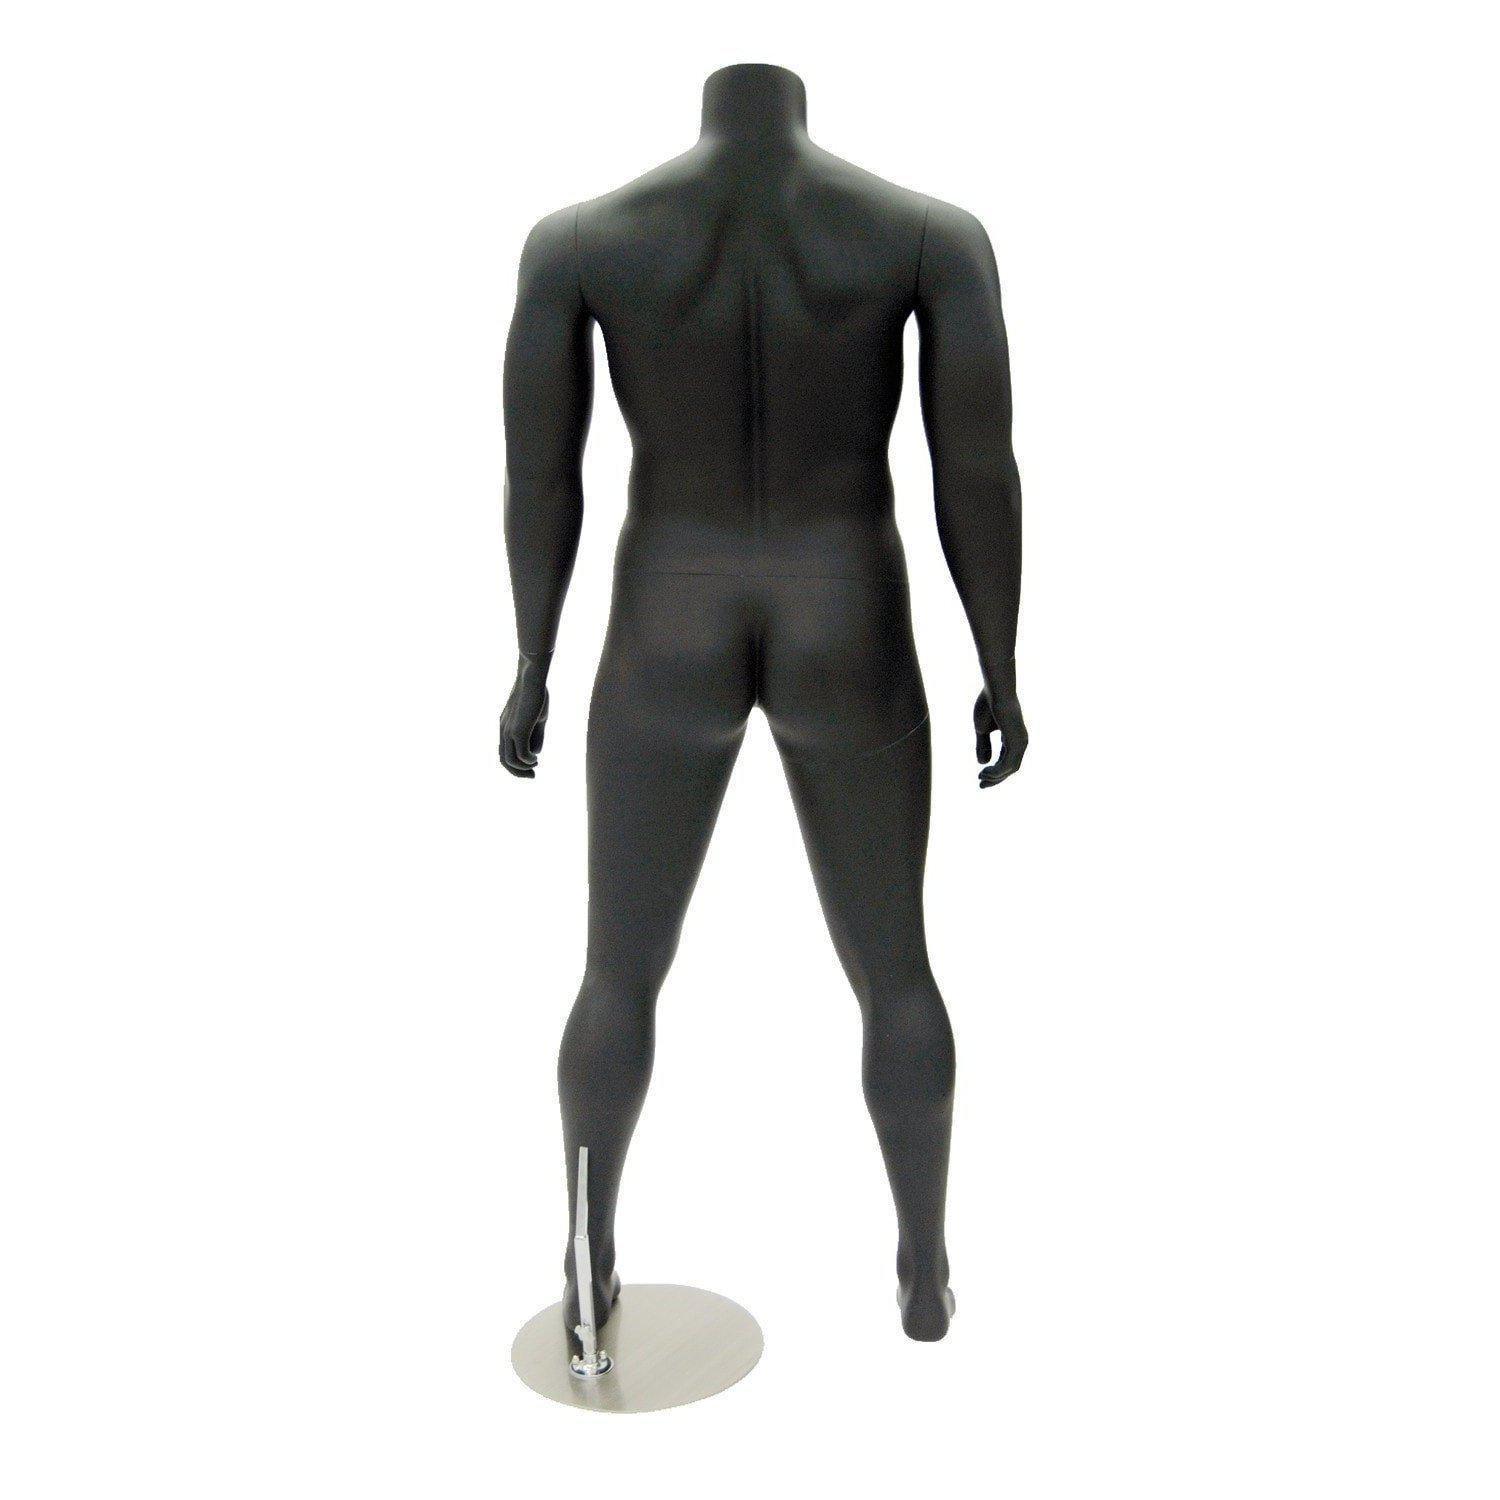 45 Must Have Outstanding Athletic Sports Mannequins! - Mannequin Mode